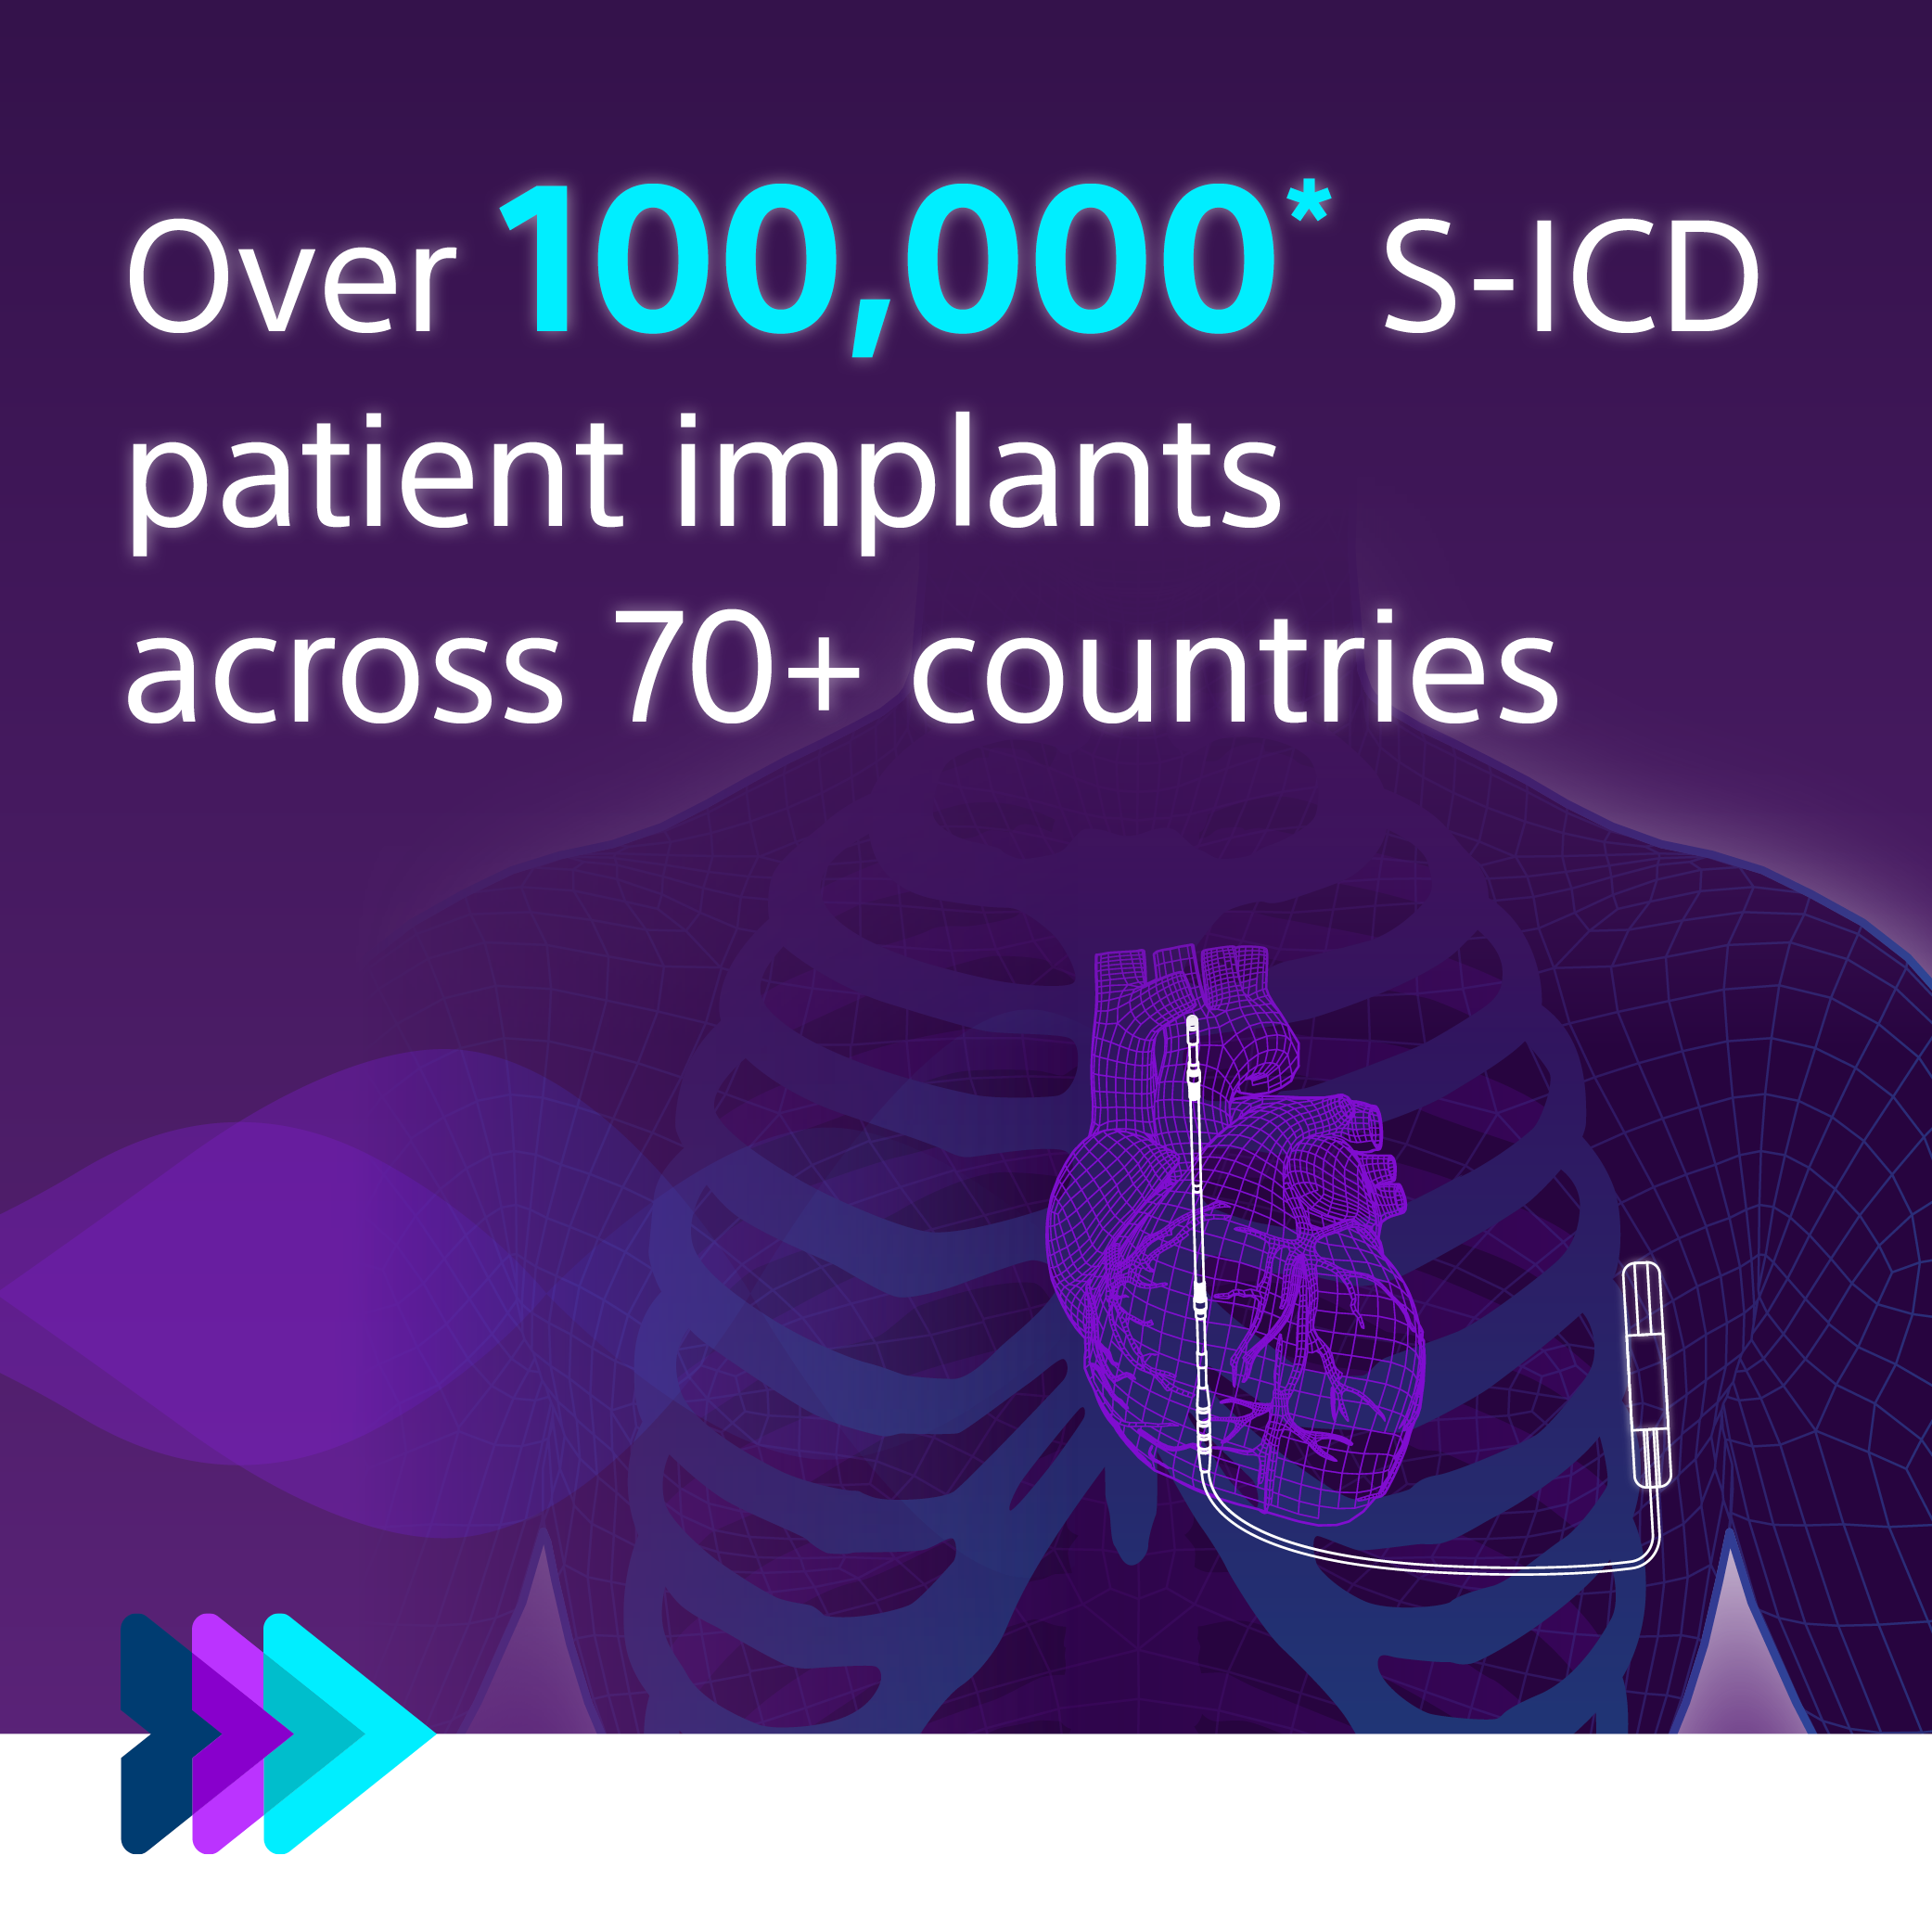 Over 100000 S-ICD patient implants across 70+ countries